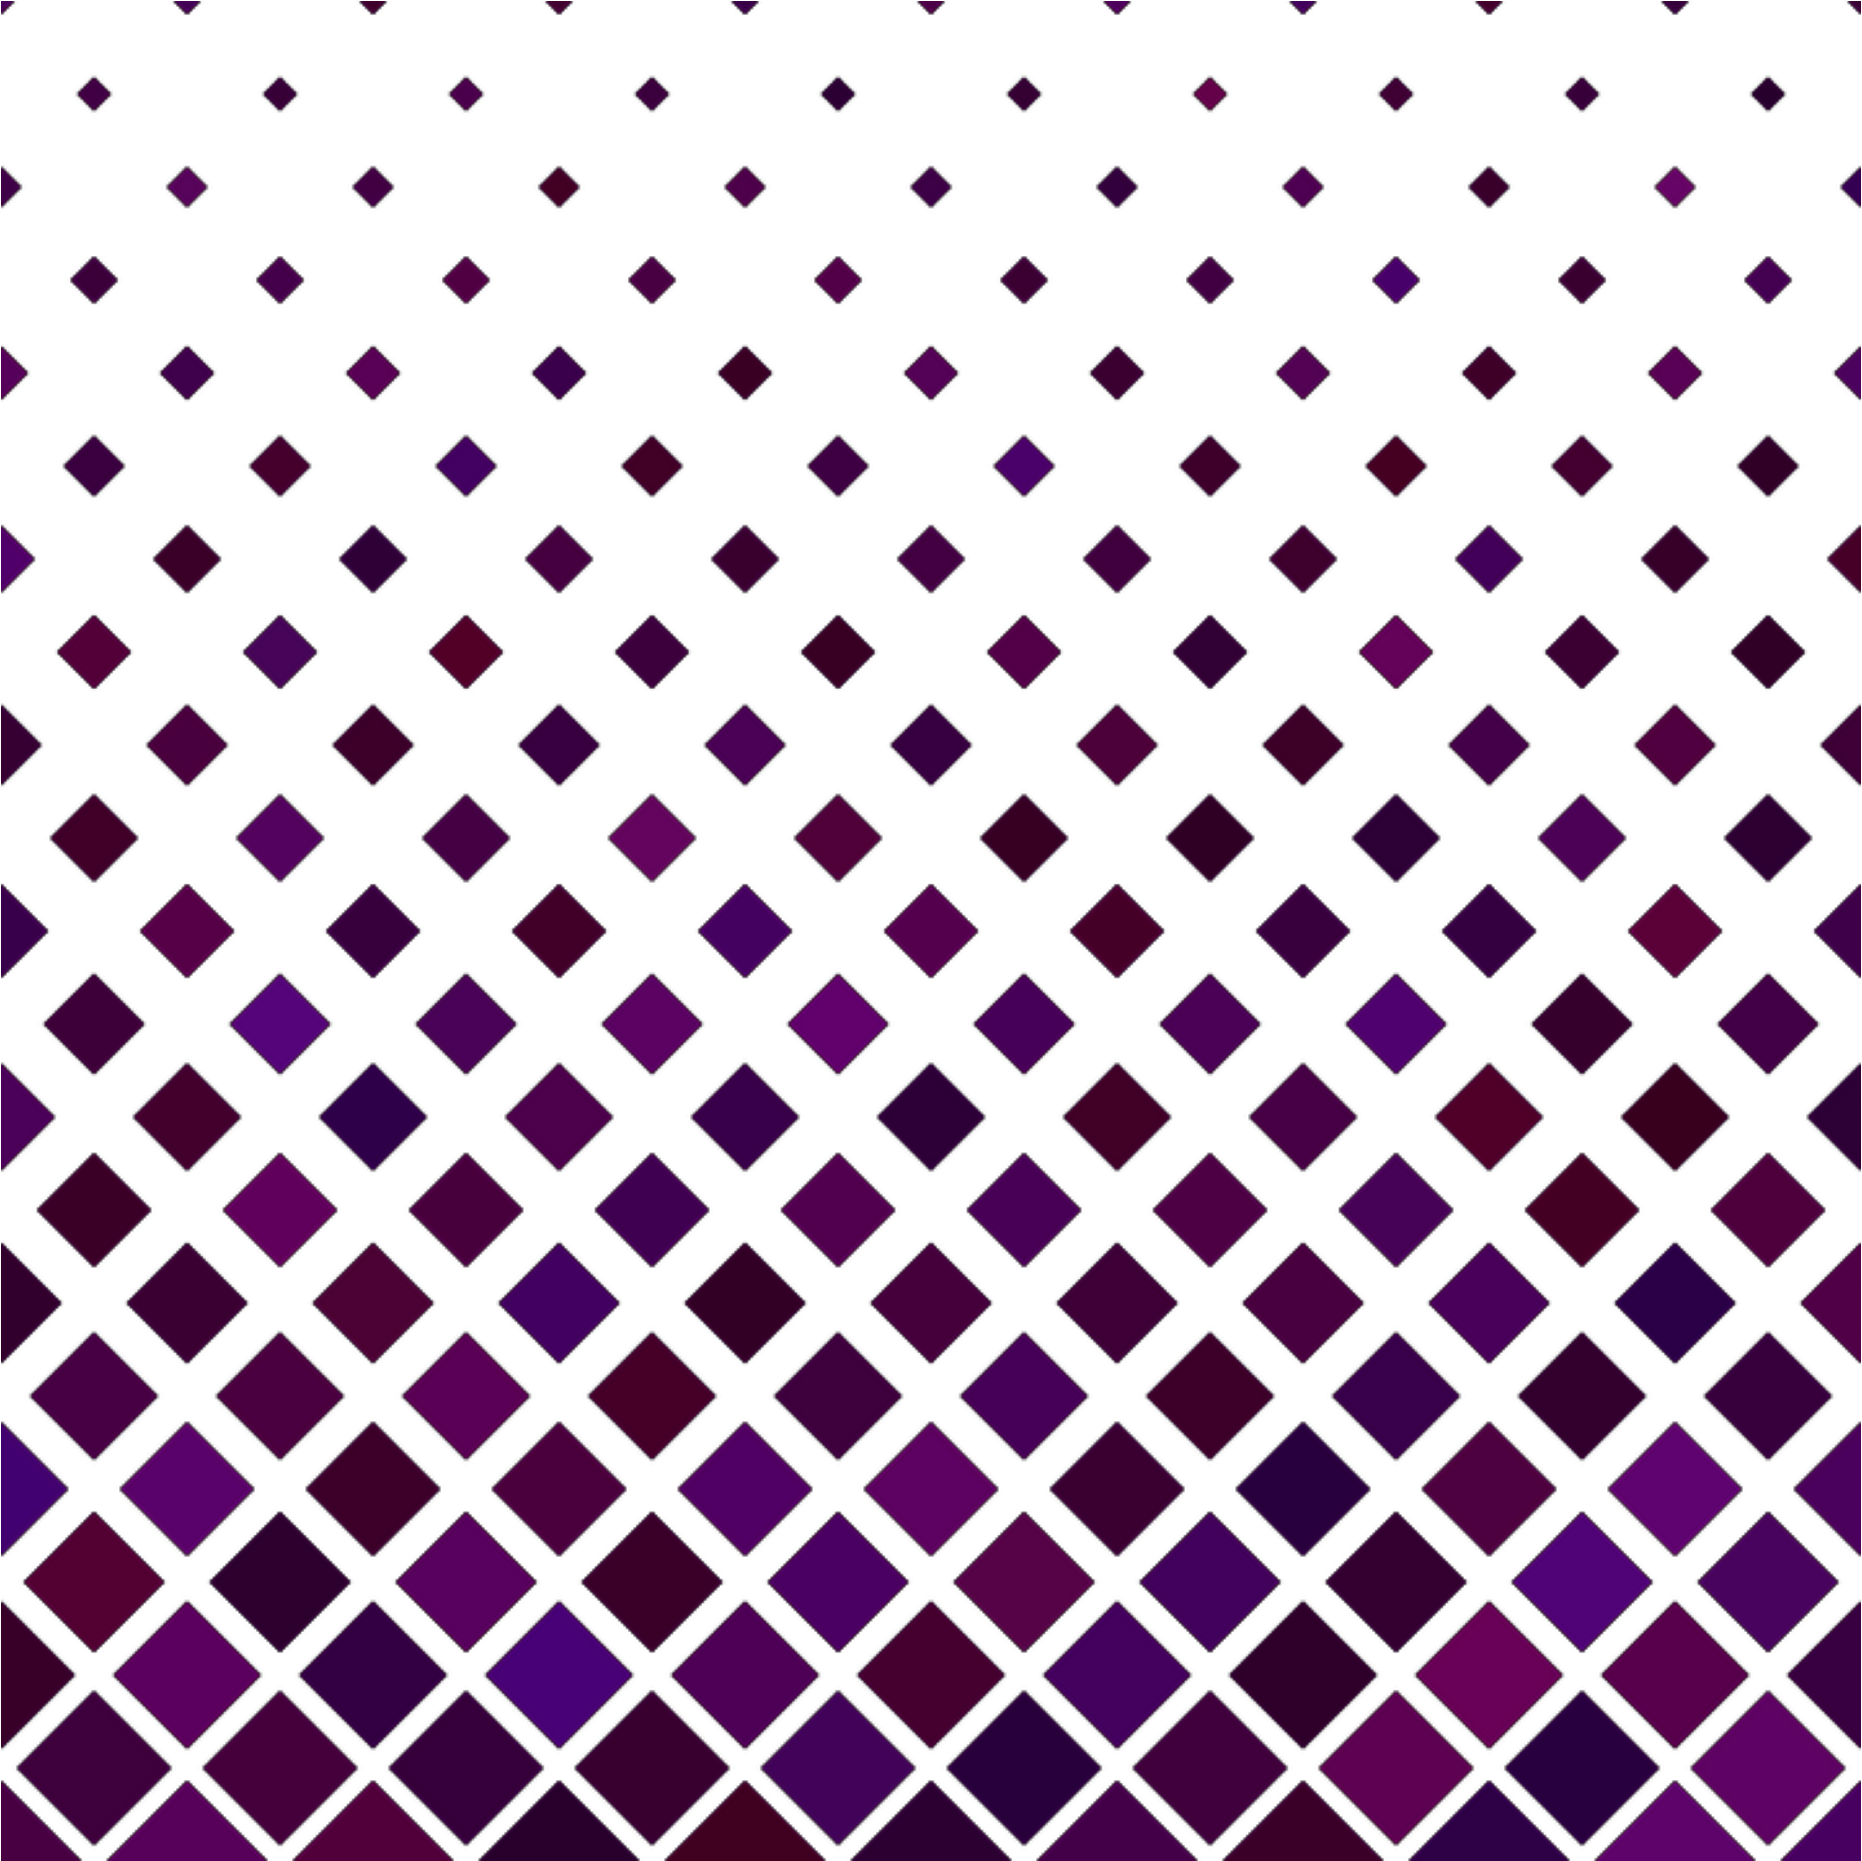 photoshop pattern overlay download